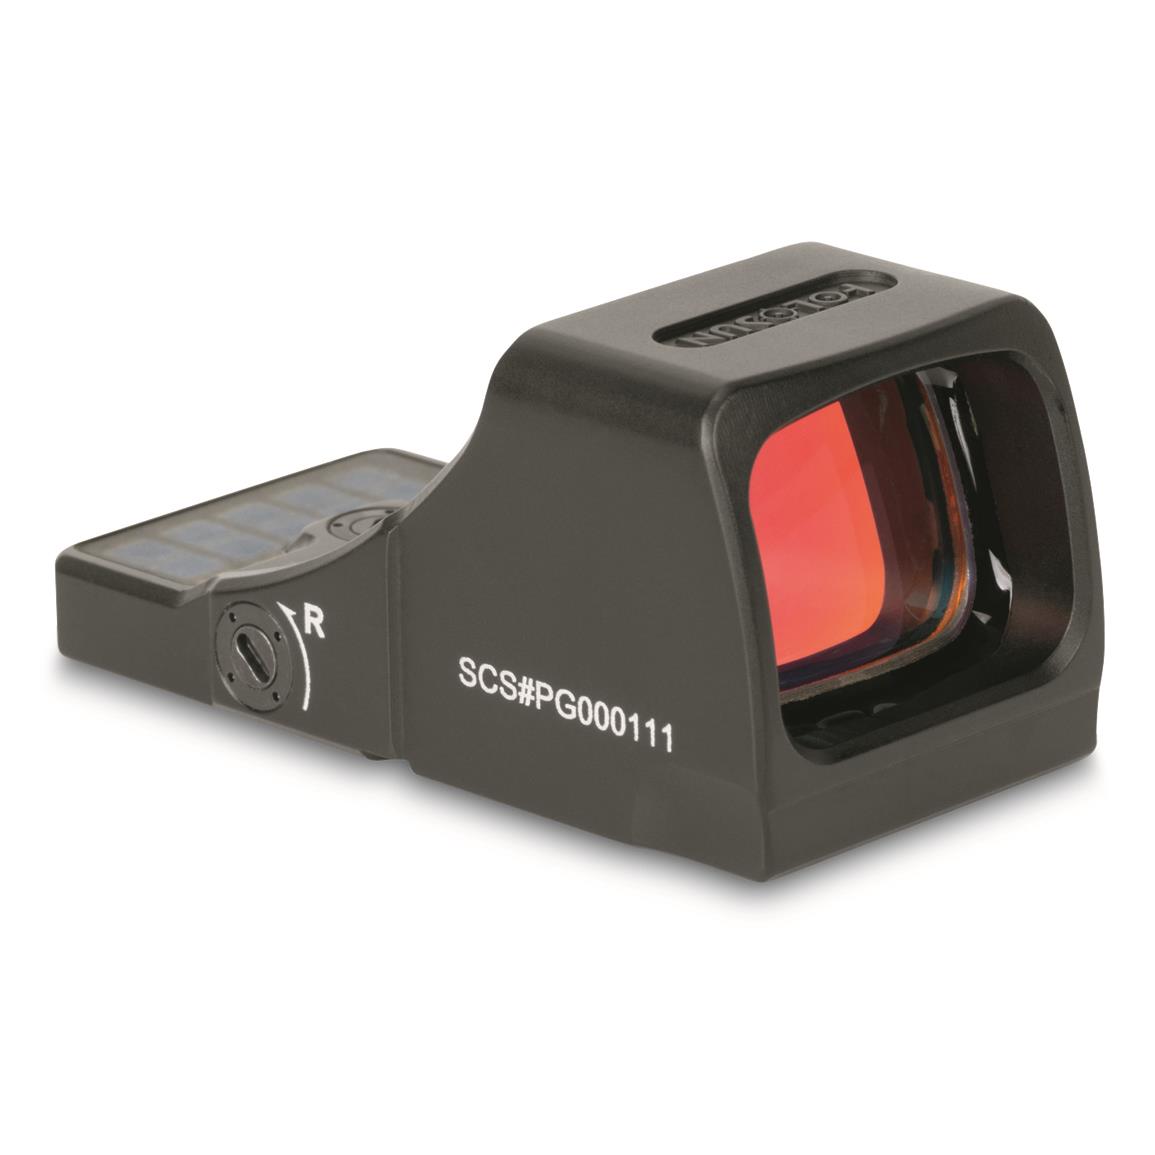 Holosun SCS M&P Solar Charging Reflex Sight, Green Dot, for Smith & Wesson M&P M2.0